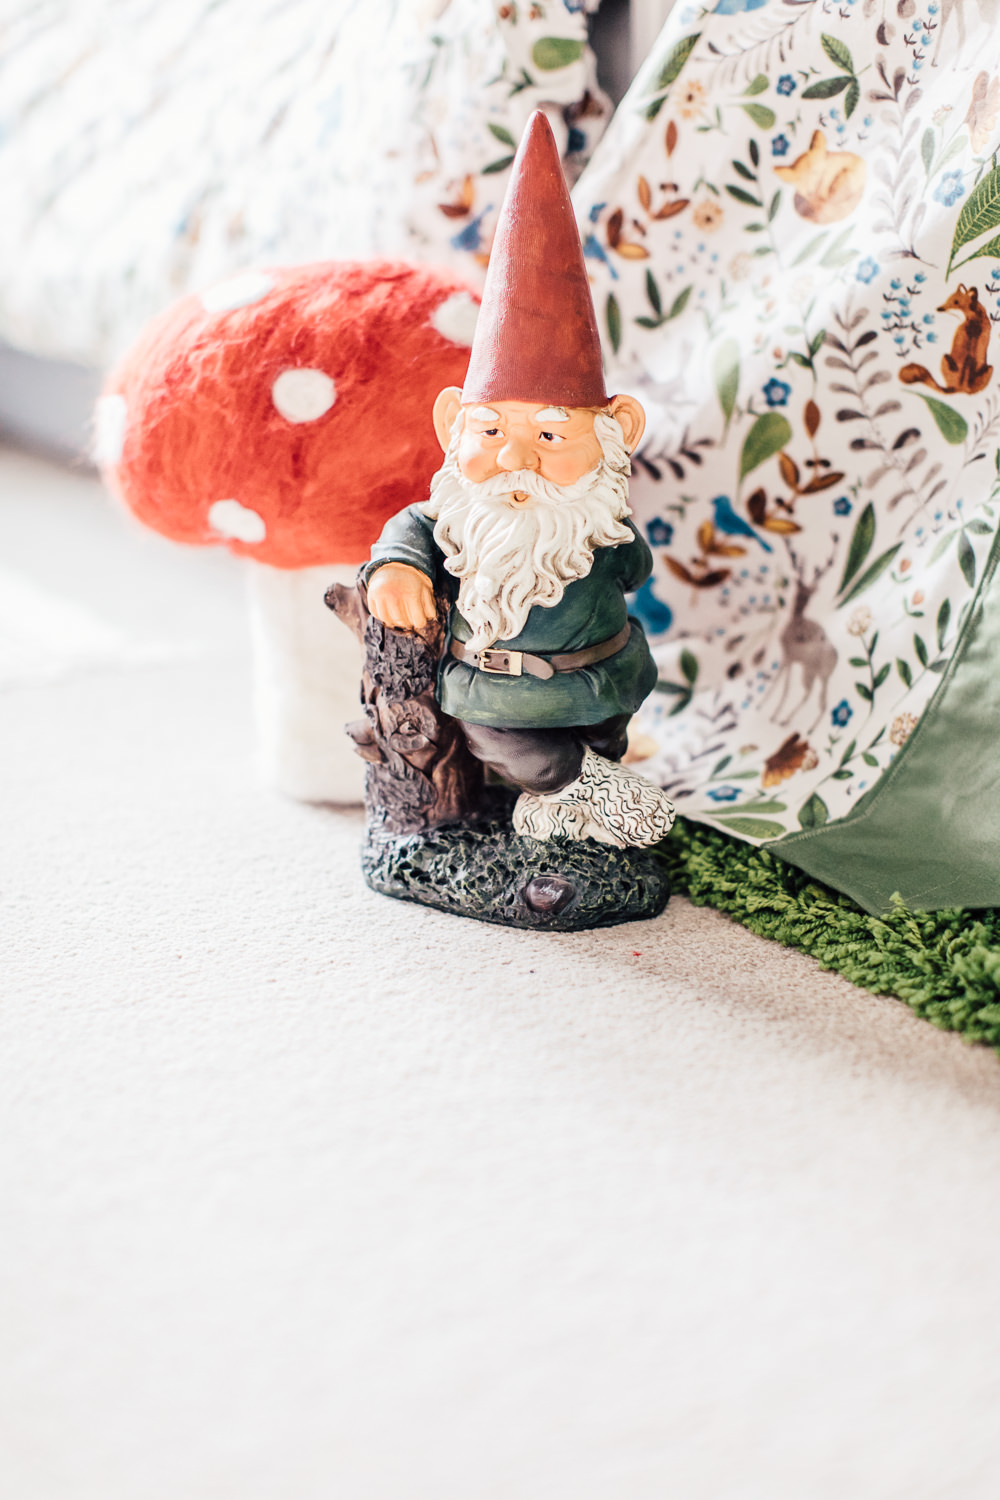 Gnome | Garden Decor |Gnome decoration in a woodland inspired children's bedroom in a rented property with homemade decor and details.